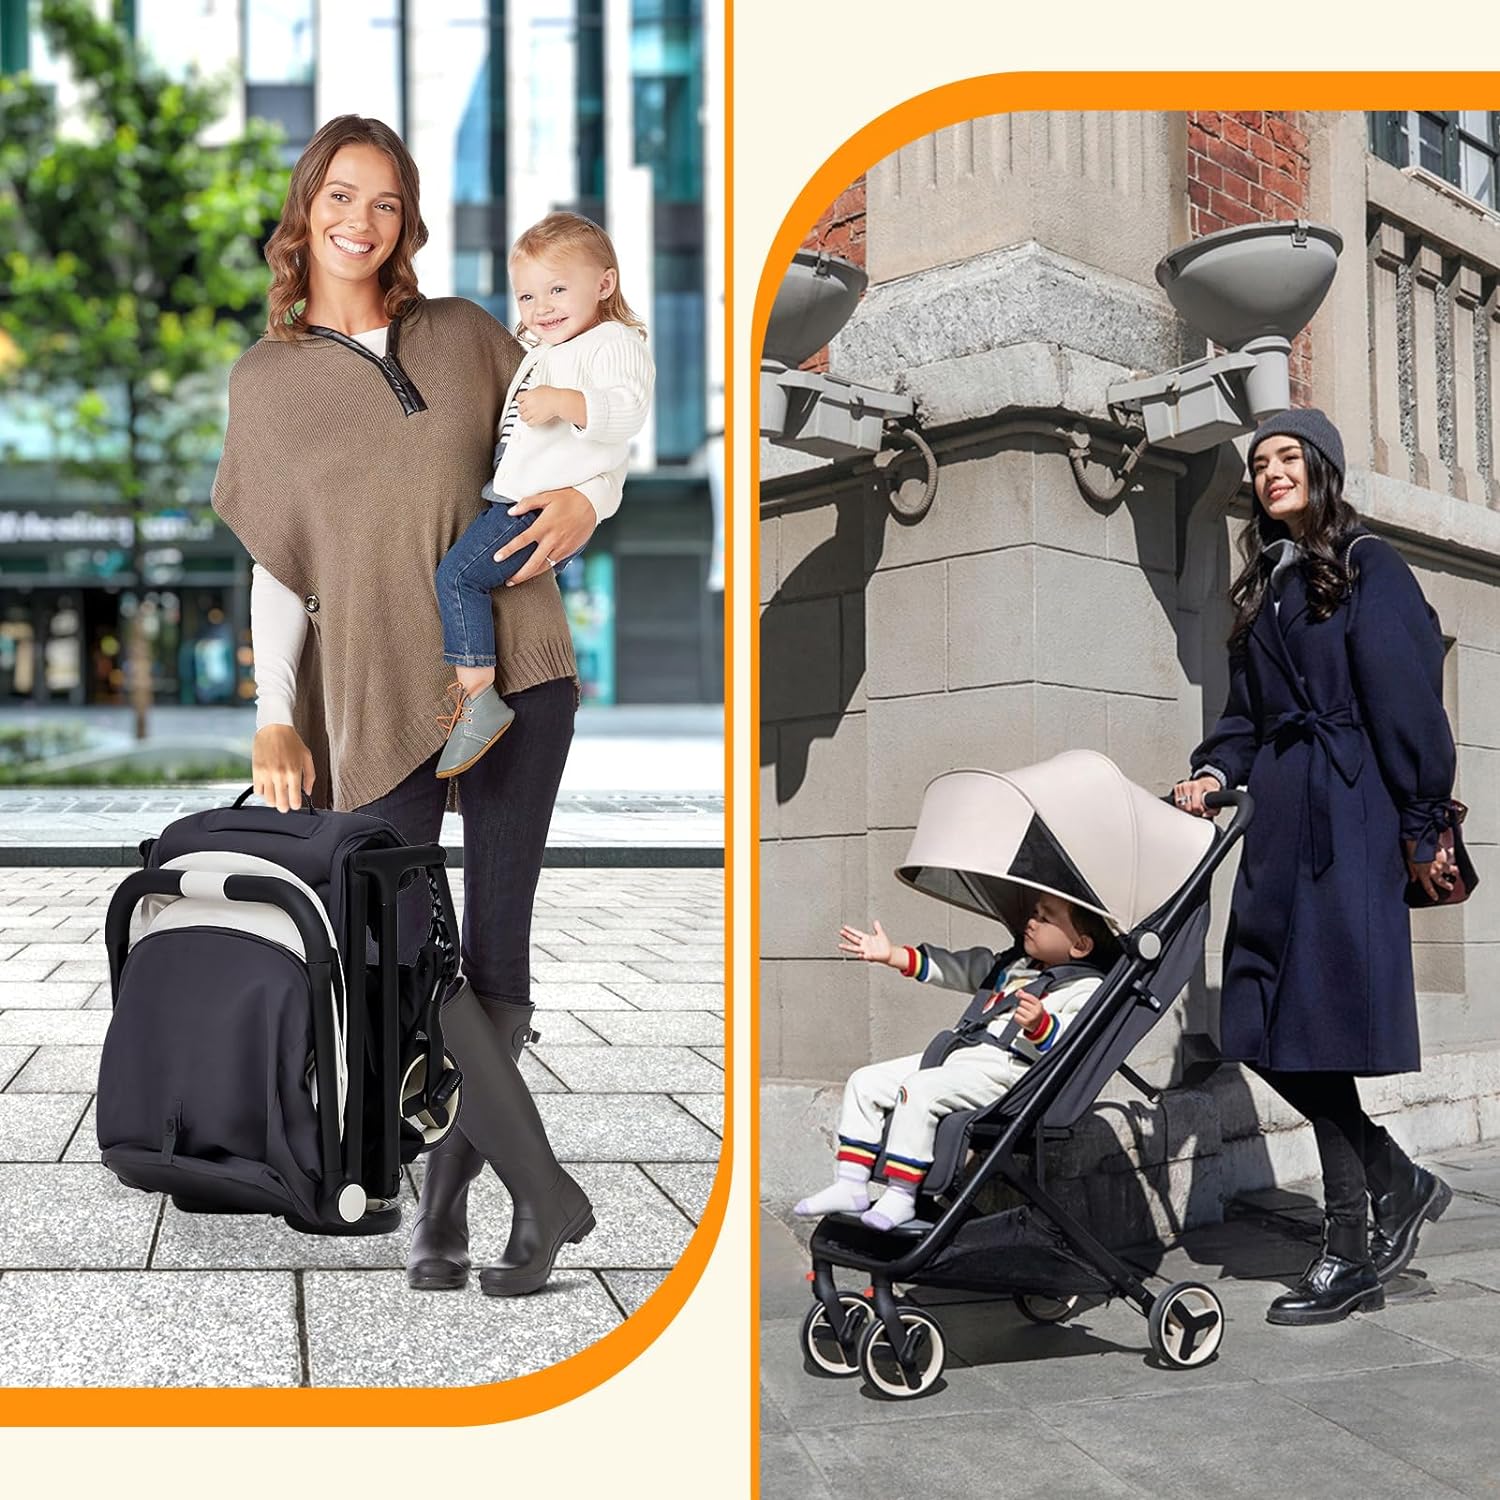 Lightweight Stroller, Compact One-Hand Fold Travel Stroller for Airplane Friendly, Reclining Seat and Canopy